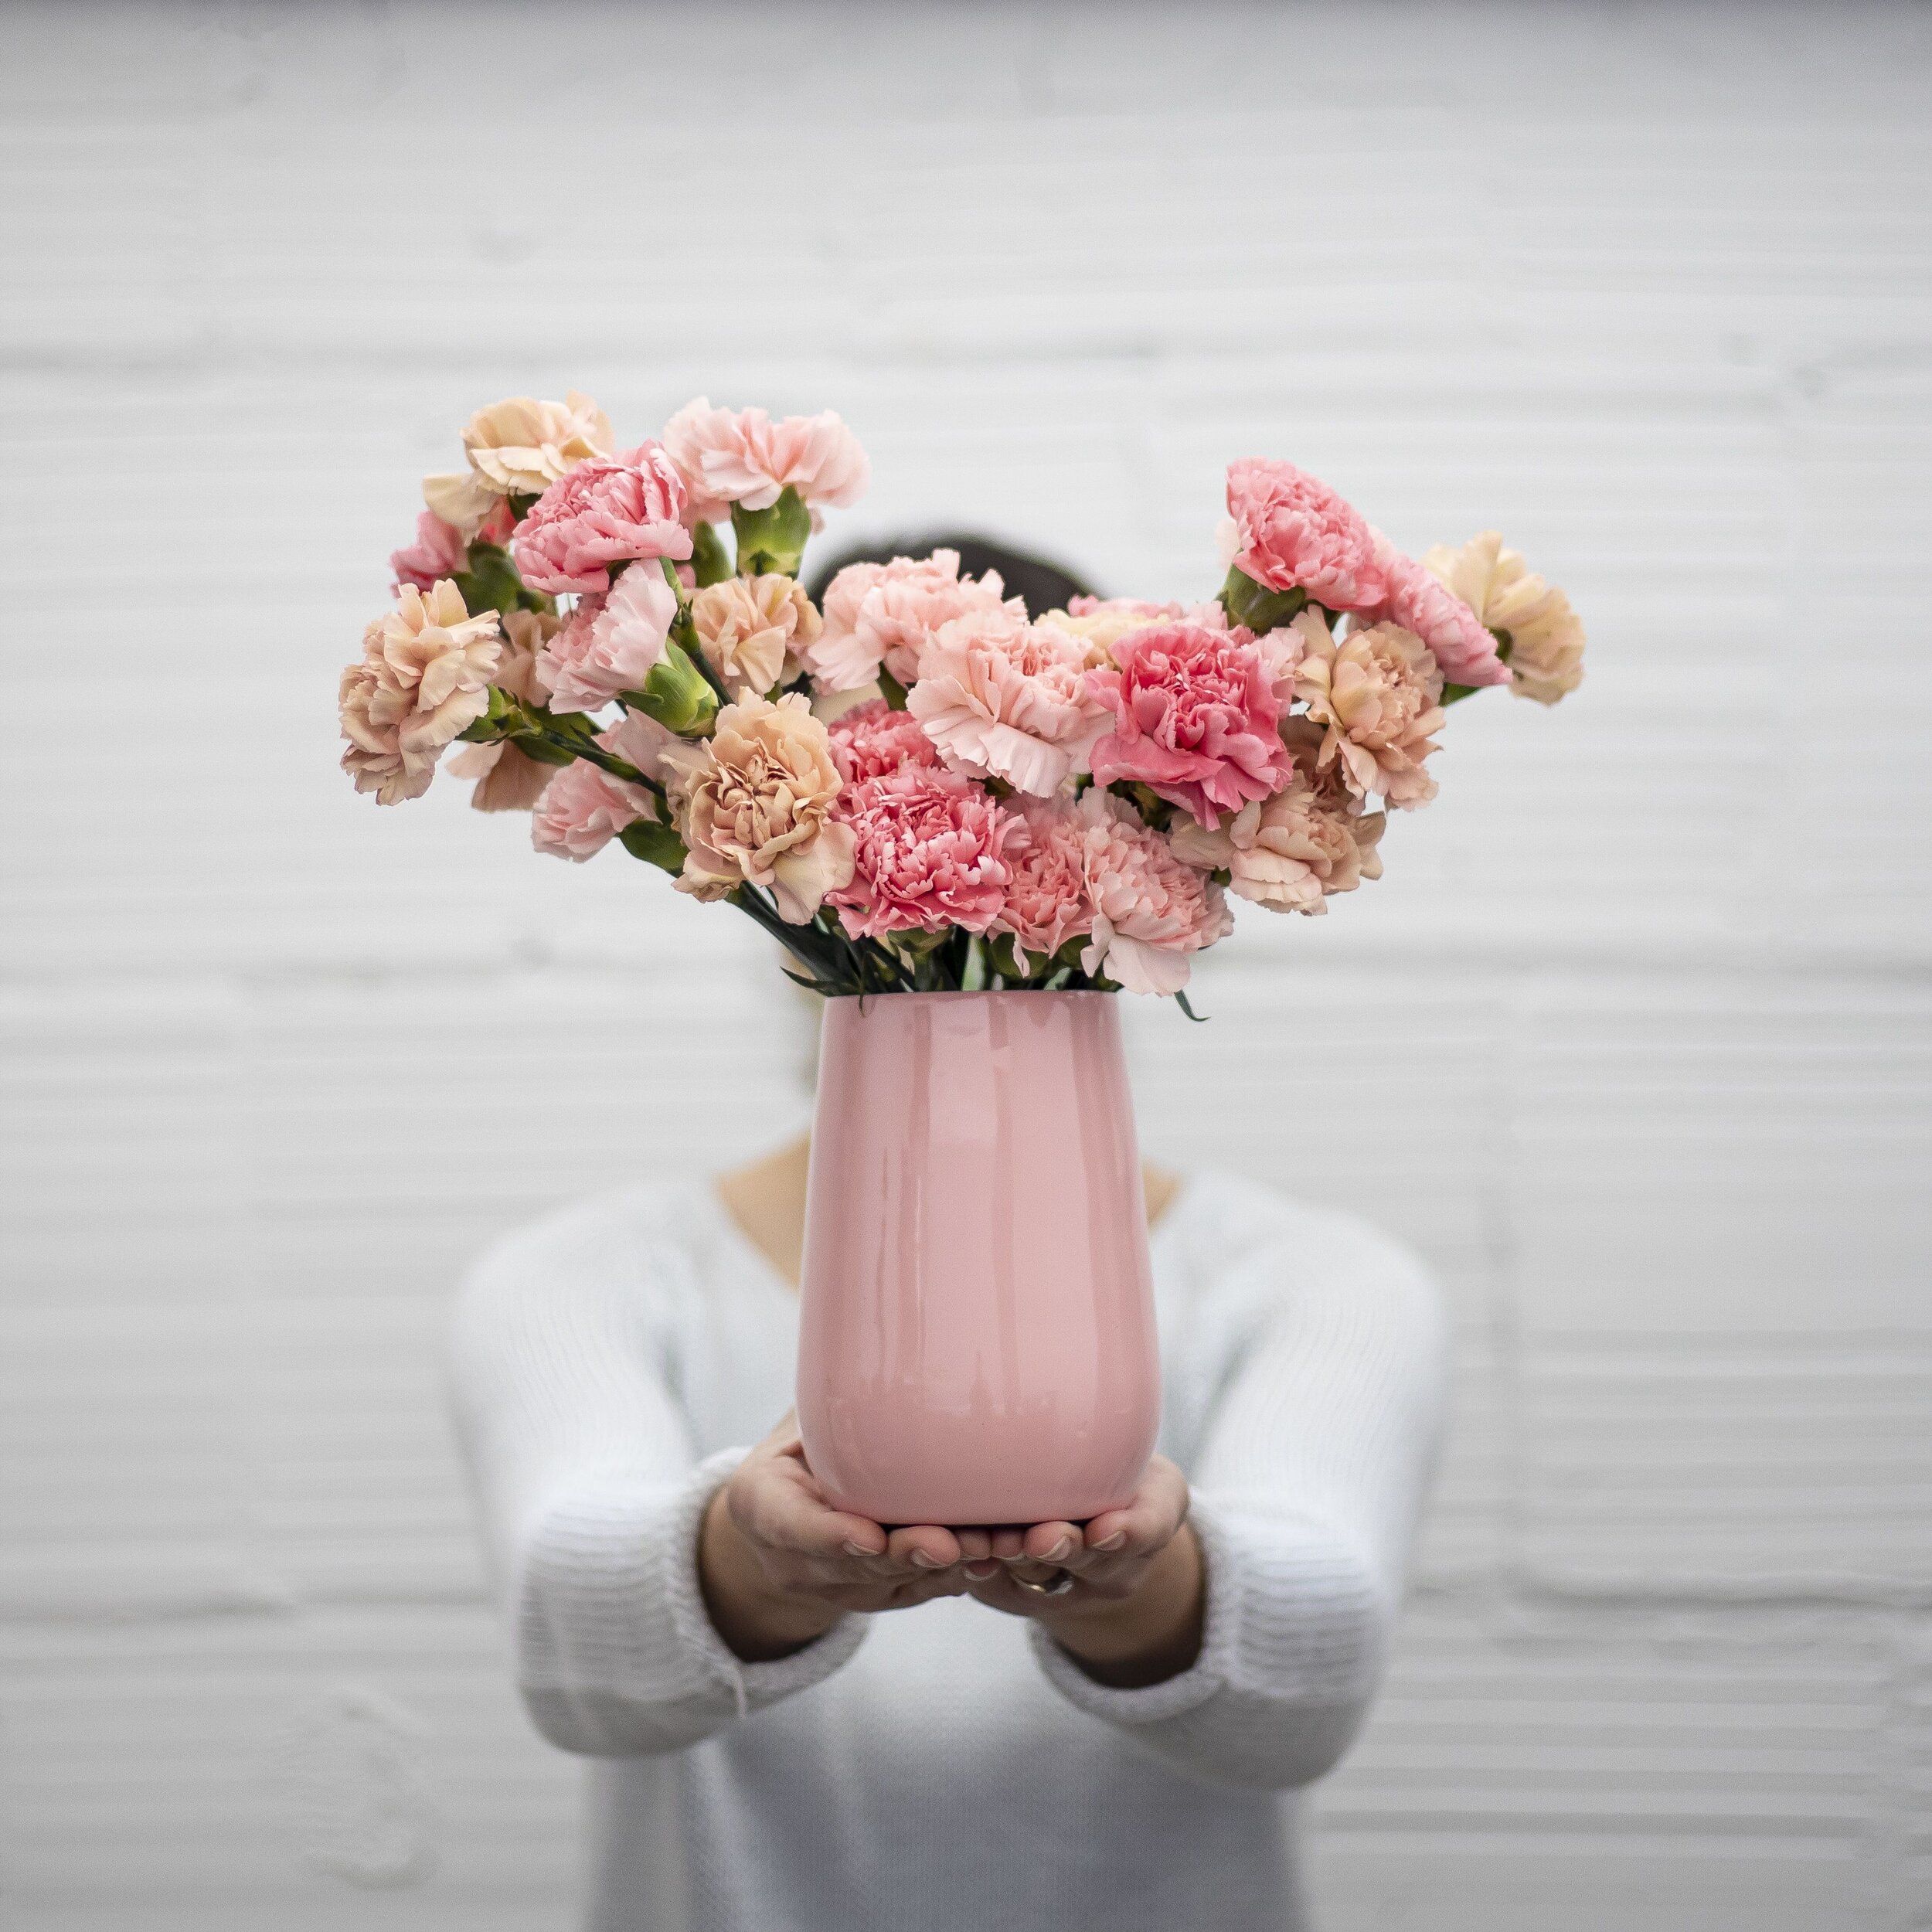 Light pink and medium pink carnations in a pink vase being held up in front of a white wall